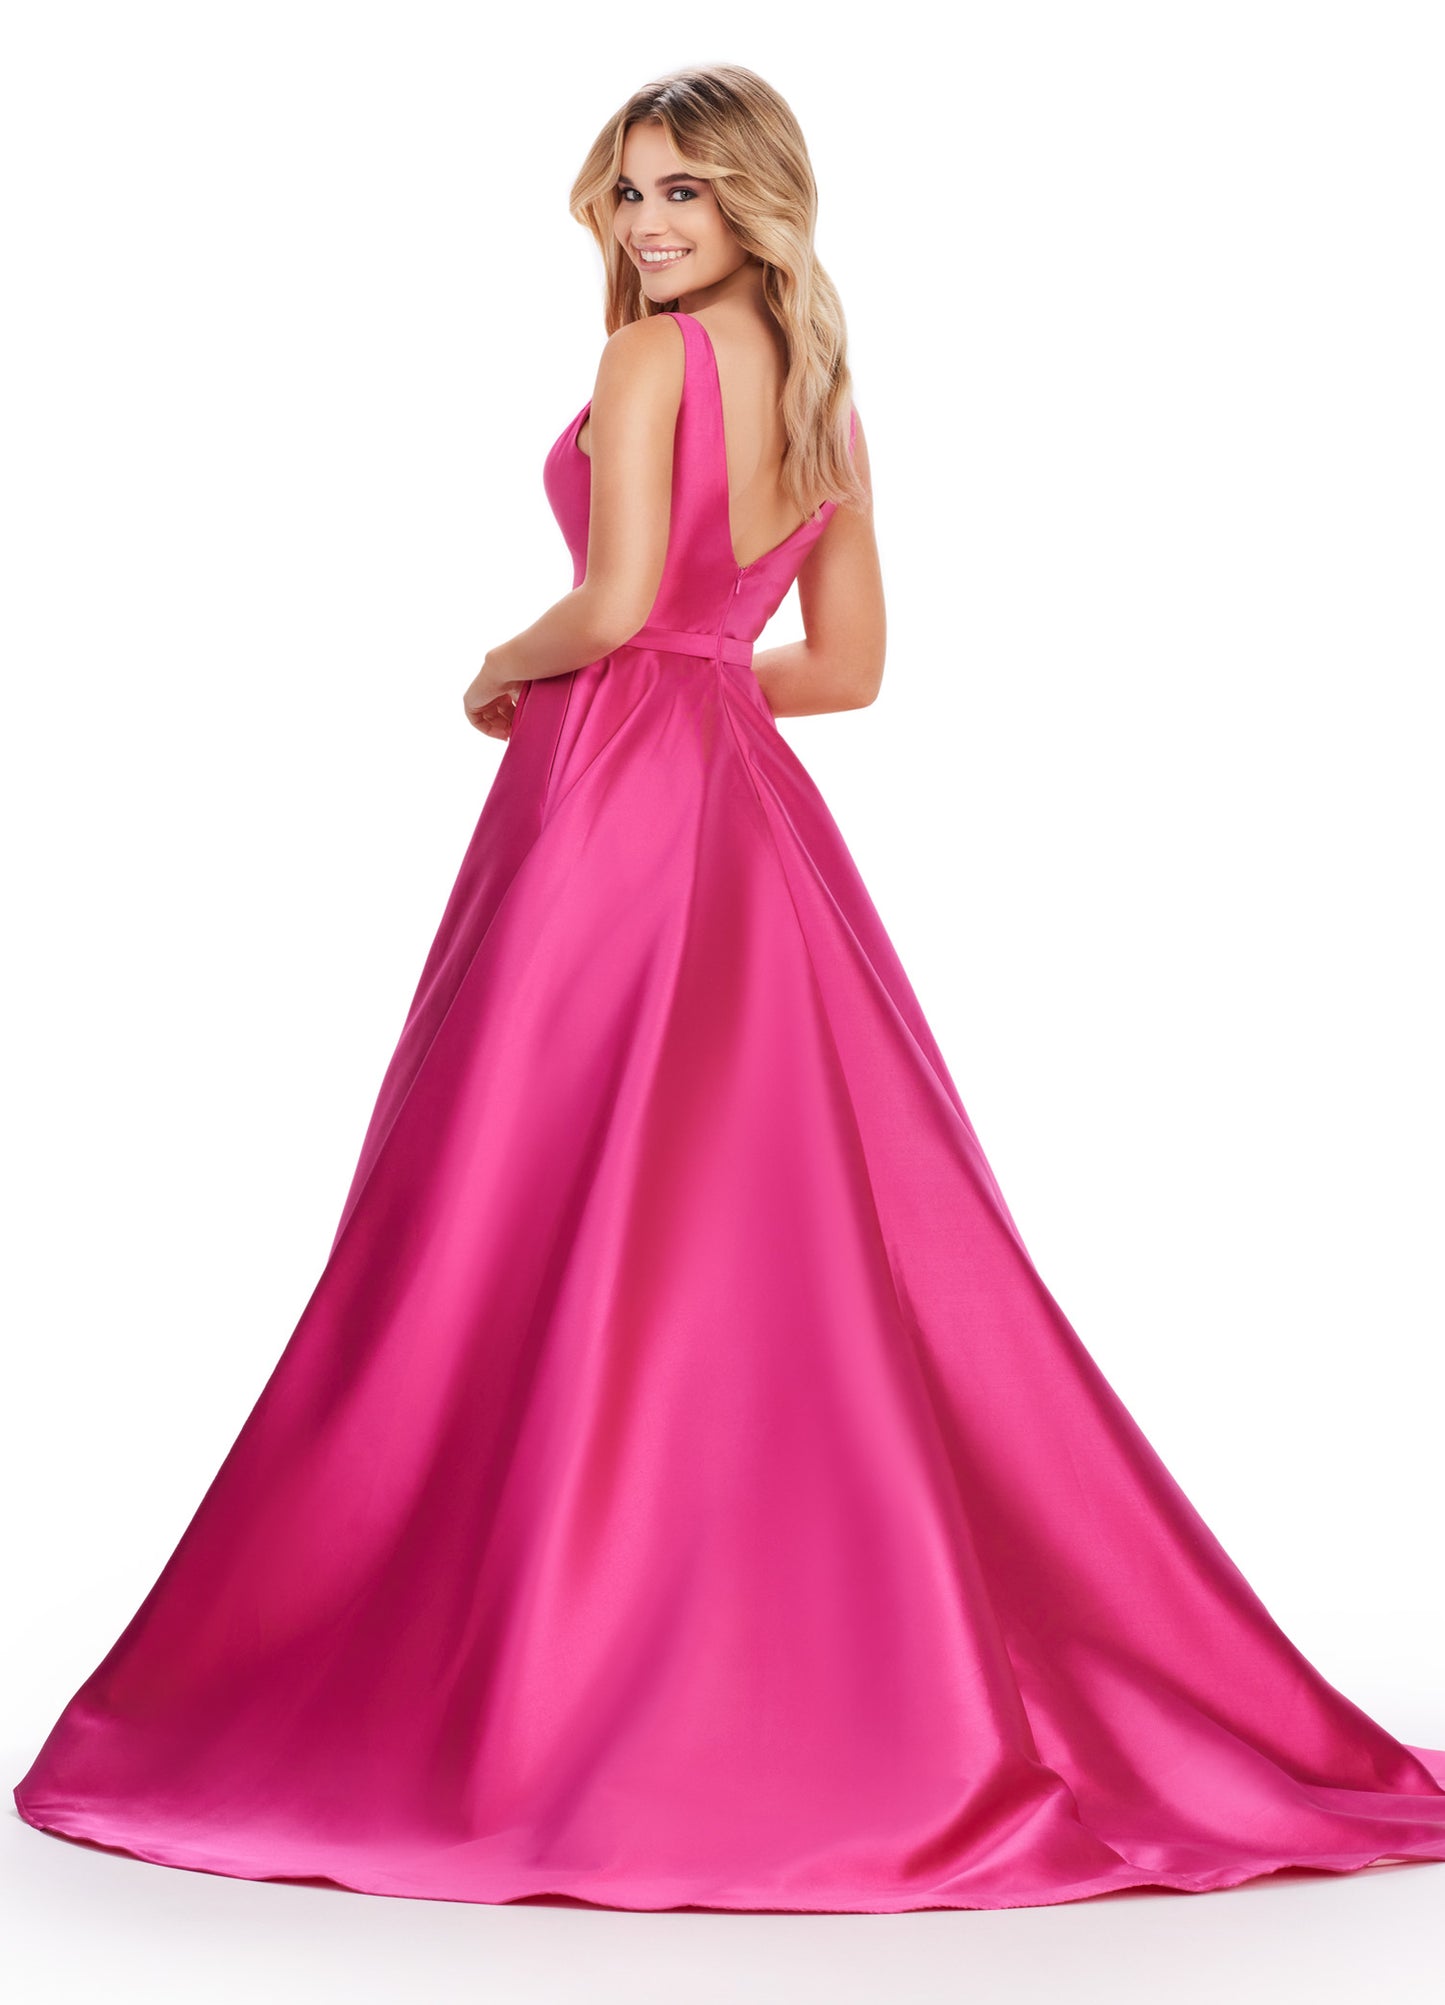 Elevate any event with the Ashley Lauren 11541 Long Prom Dress. The V-neck Mikado gown features a sweeping train for a formal and pageant-ready look. Turn heads with this elegant and expertly crafted gown. A classic! This v neck Mikado ball gown features a gorgeous sweep train and a waist detail.